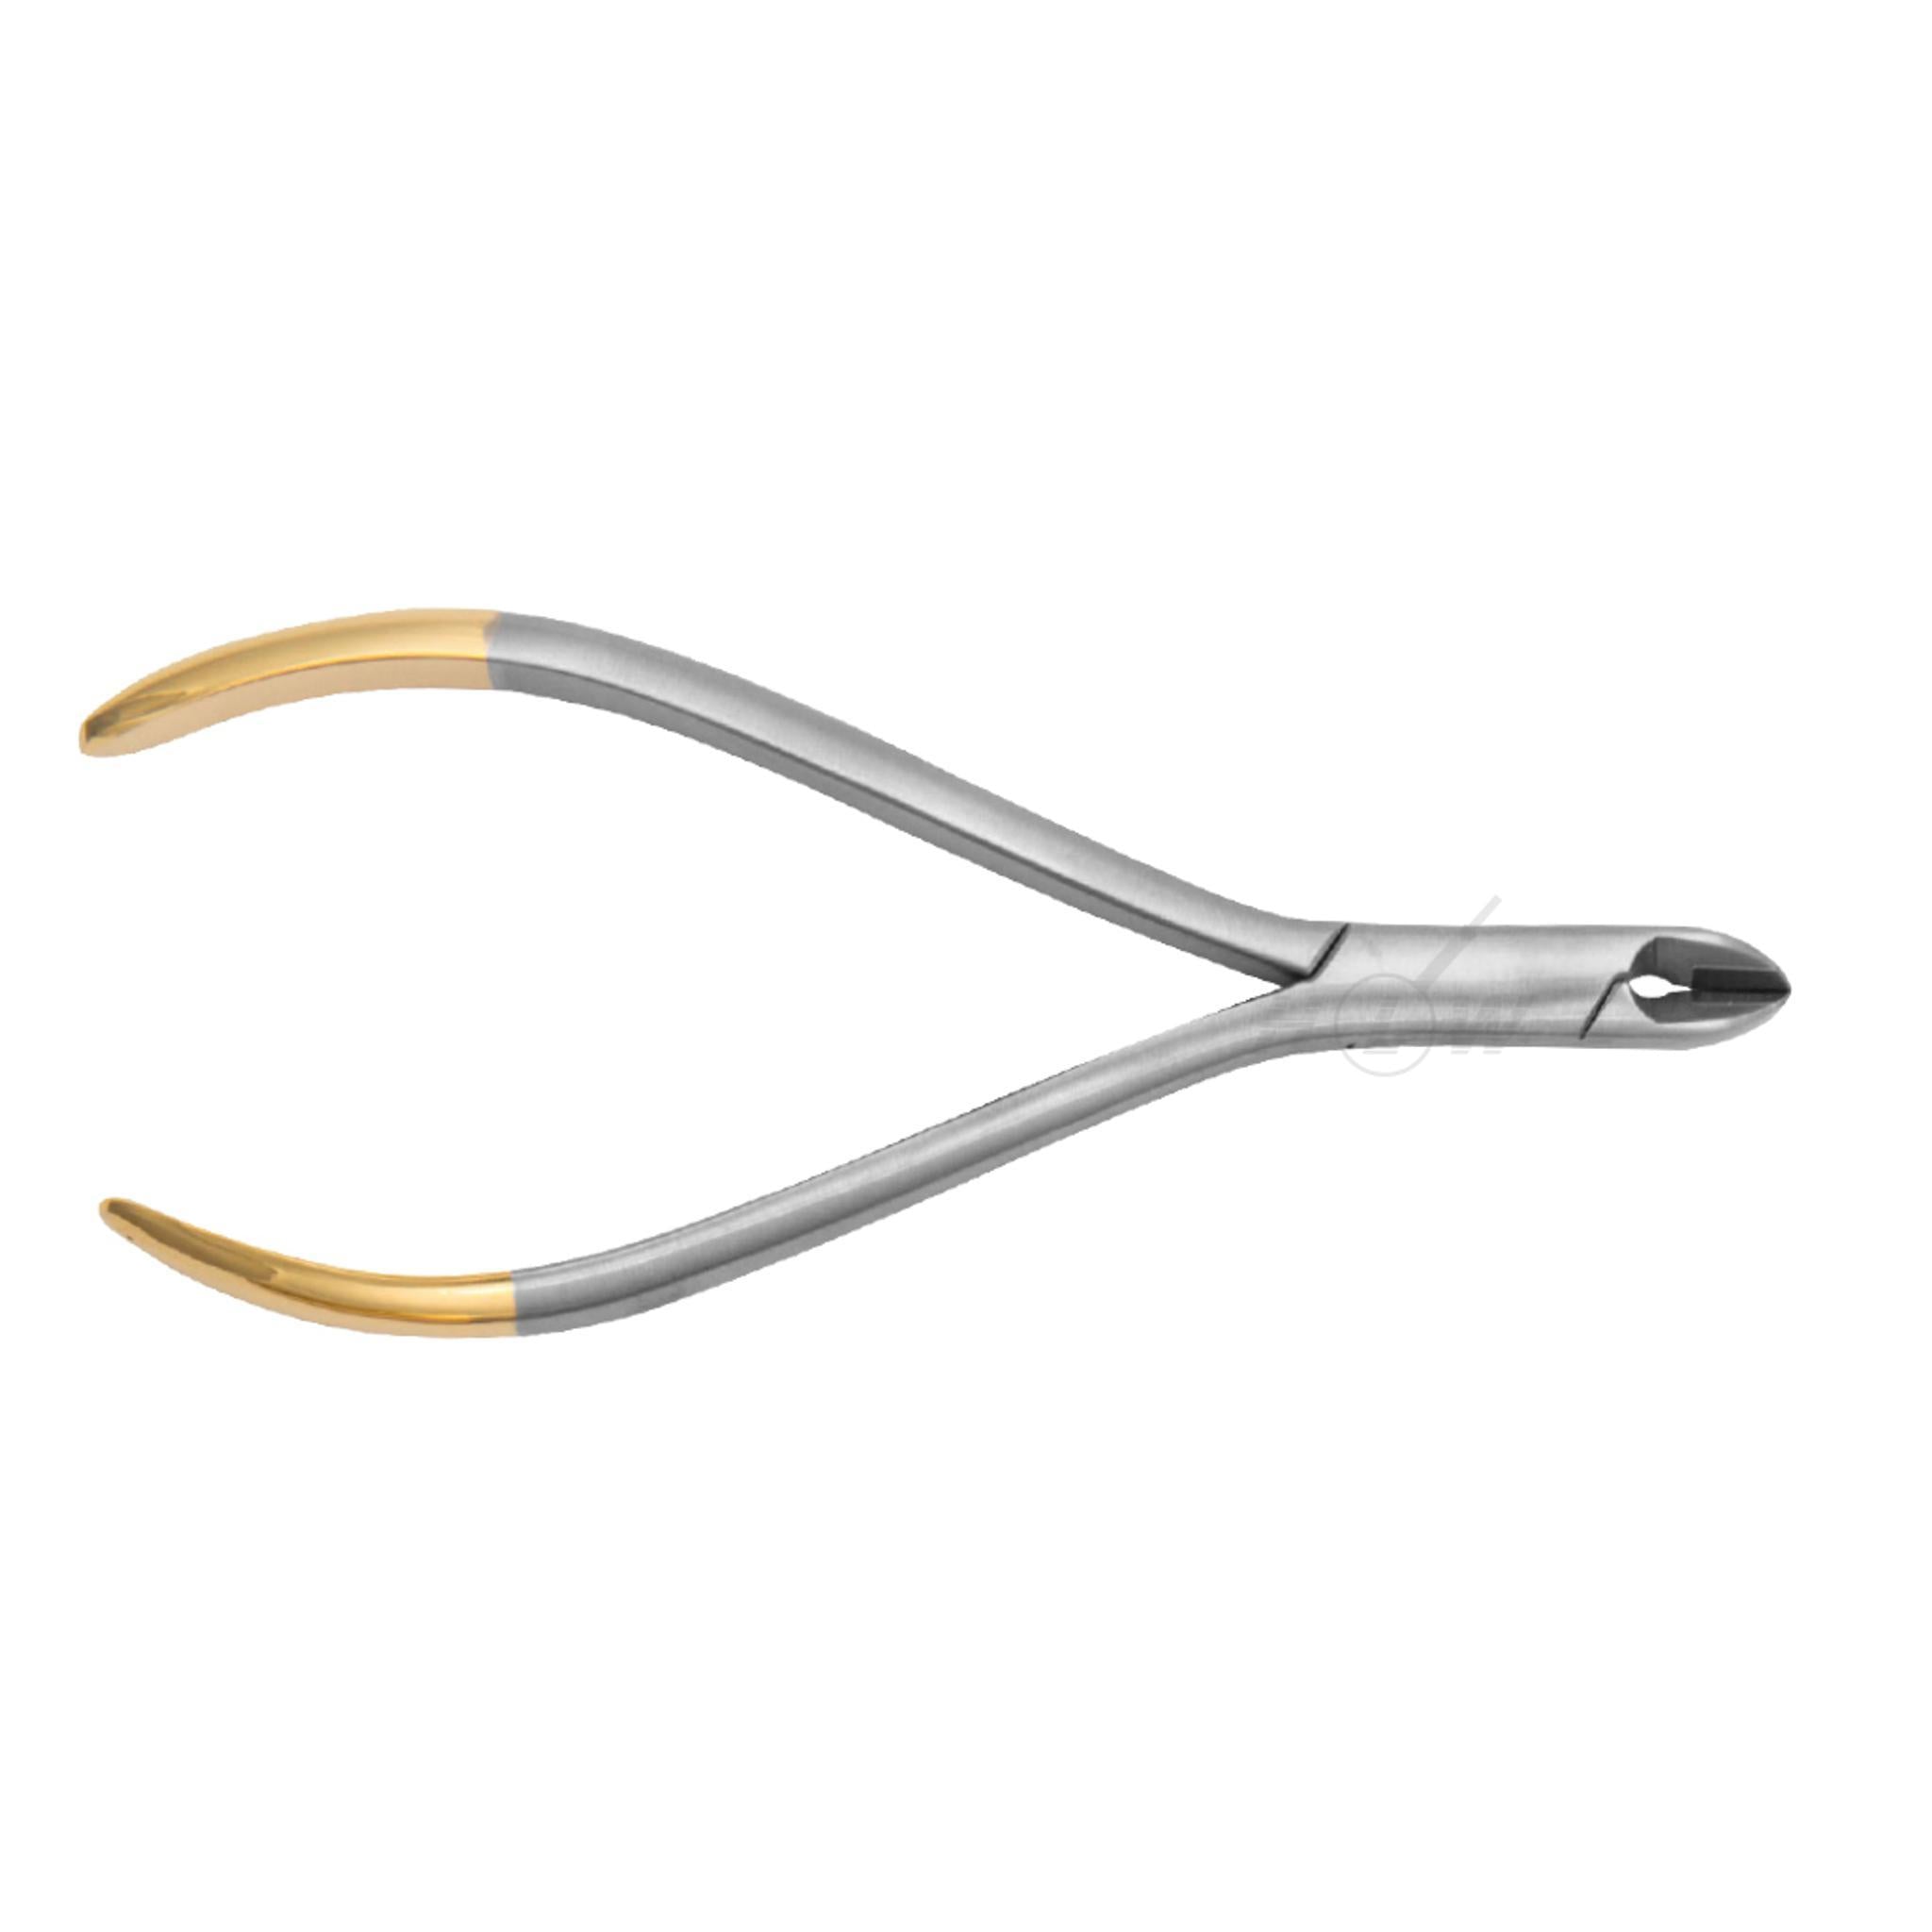 Wire cutting pliers<br> Made of tungsten carbide